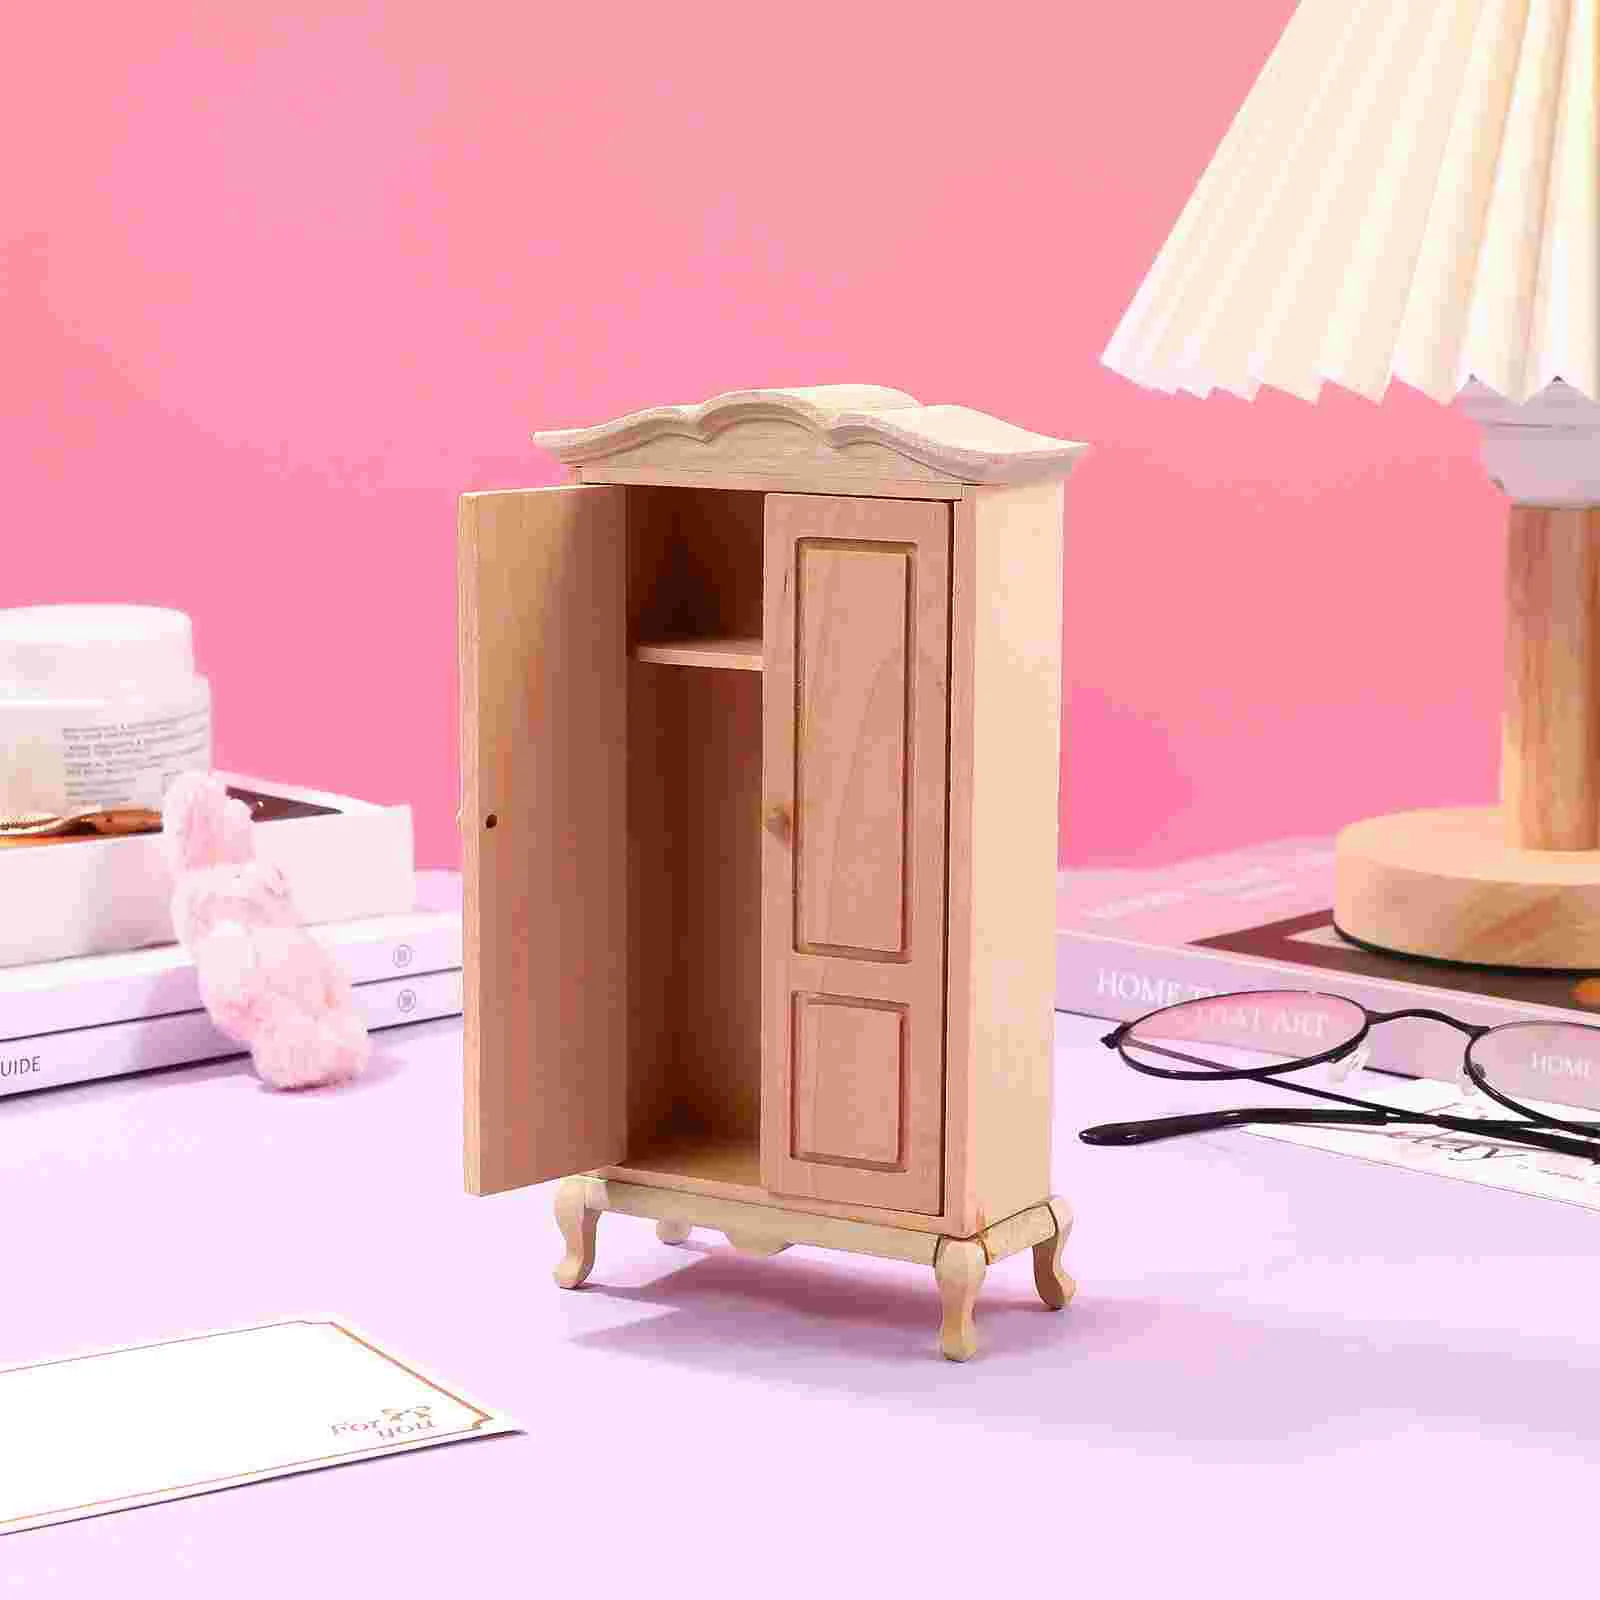 

Wardrobe Model Toy House Cabinet Furniture Wooden Playset Miniature Dollhouse Decor Accessories for